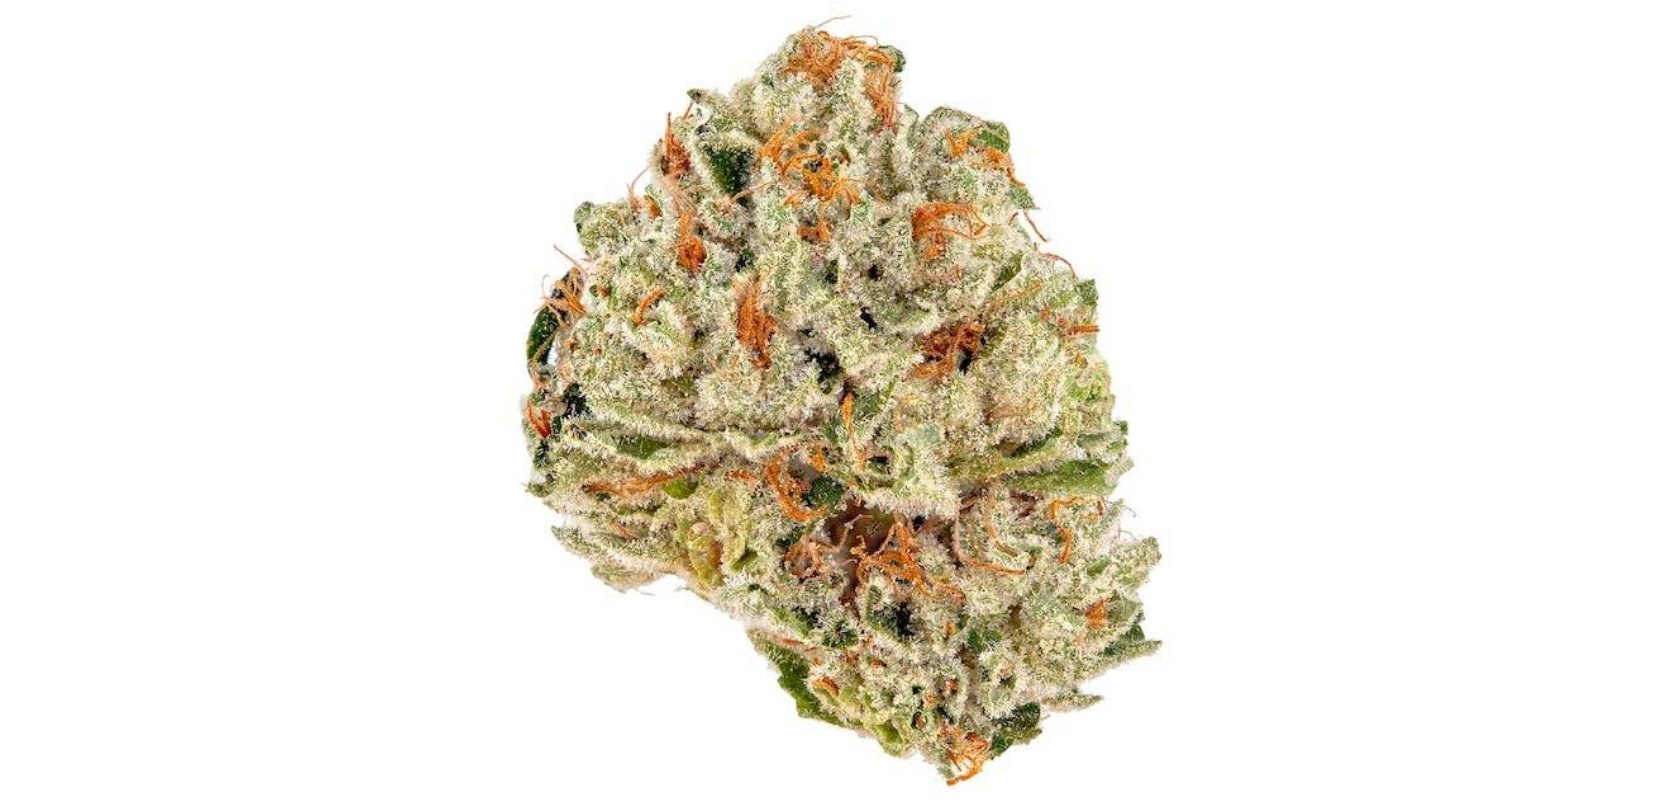 Tropicali Punch, also simply called Tropical Punch, is a sativa dominant hybrid strain created by crossing the delicious Skunk, Haze and Northern Lights strains. 